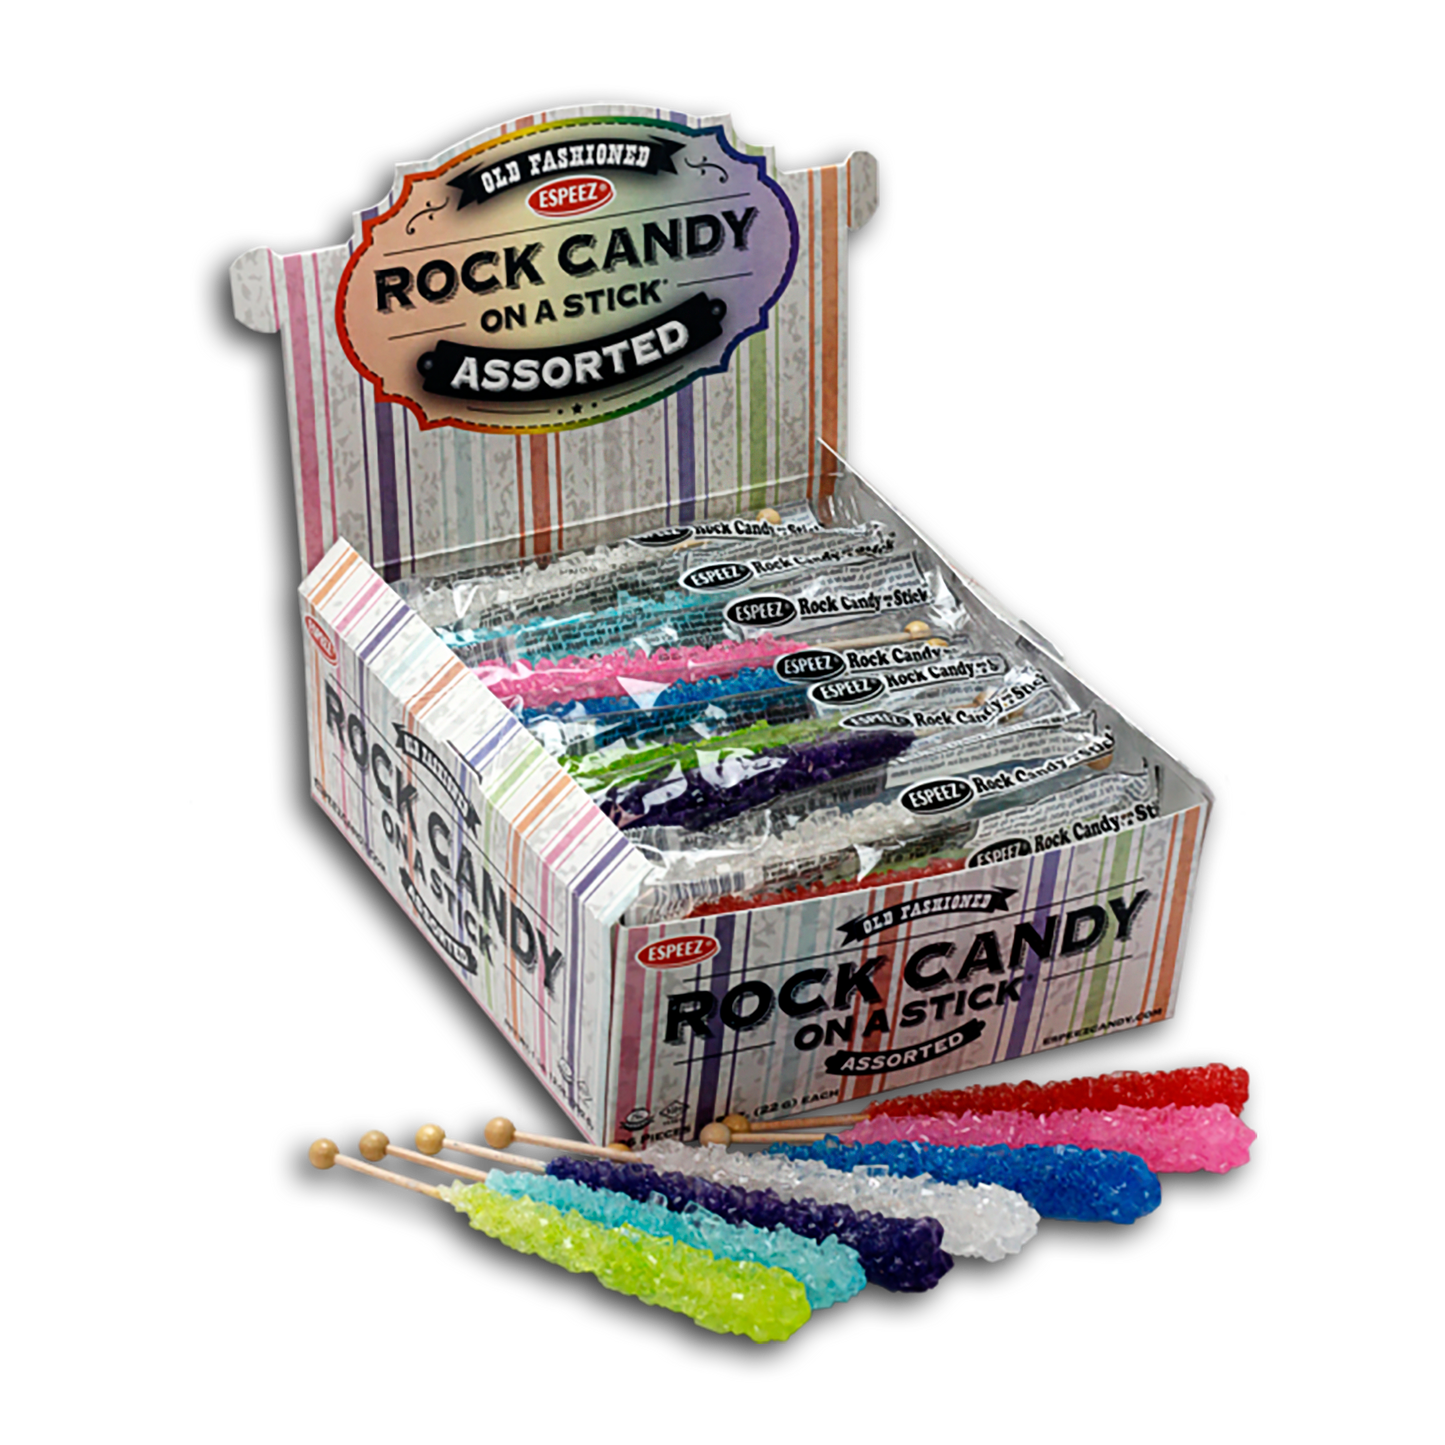 36PC ROCK CANDY ON A STICK DISPLAY